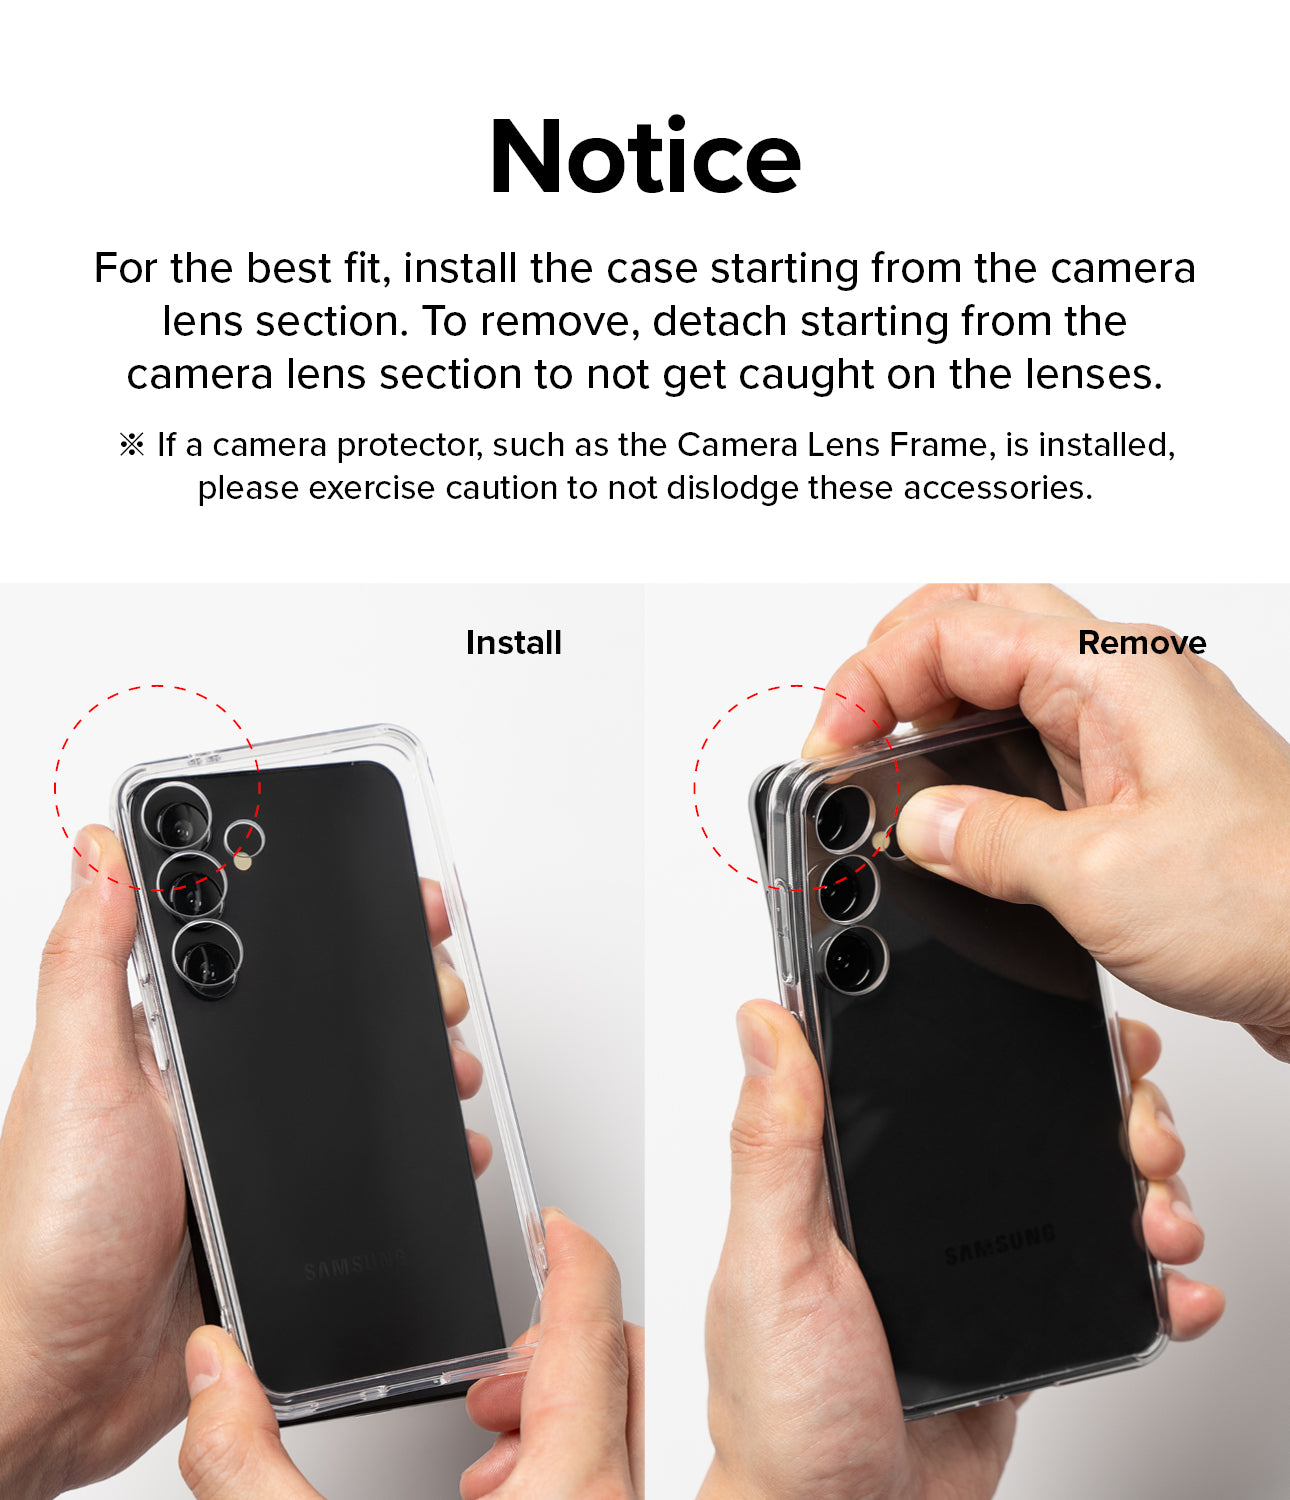 Galaxy A35 Case | Fusion - Notice. For the best fit, install the case starting from the camera lens section. To remove, detach starting from the camera lens section to not get caught on the lenses.